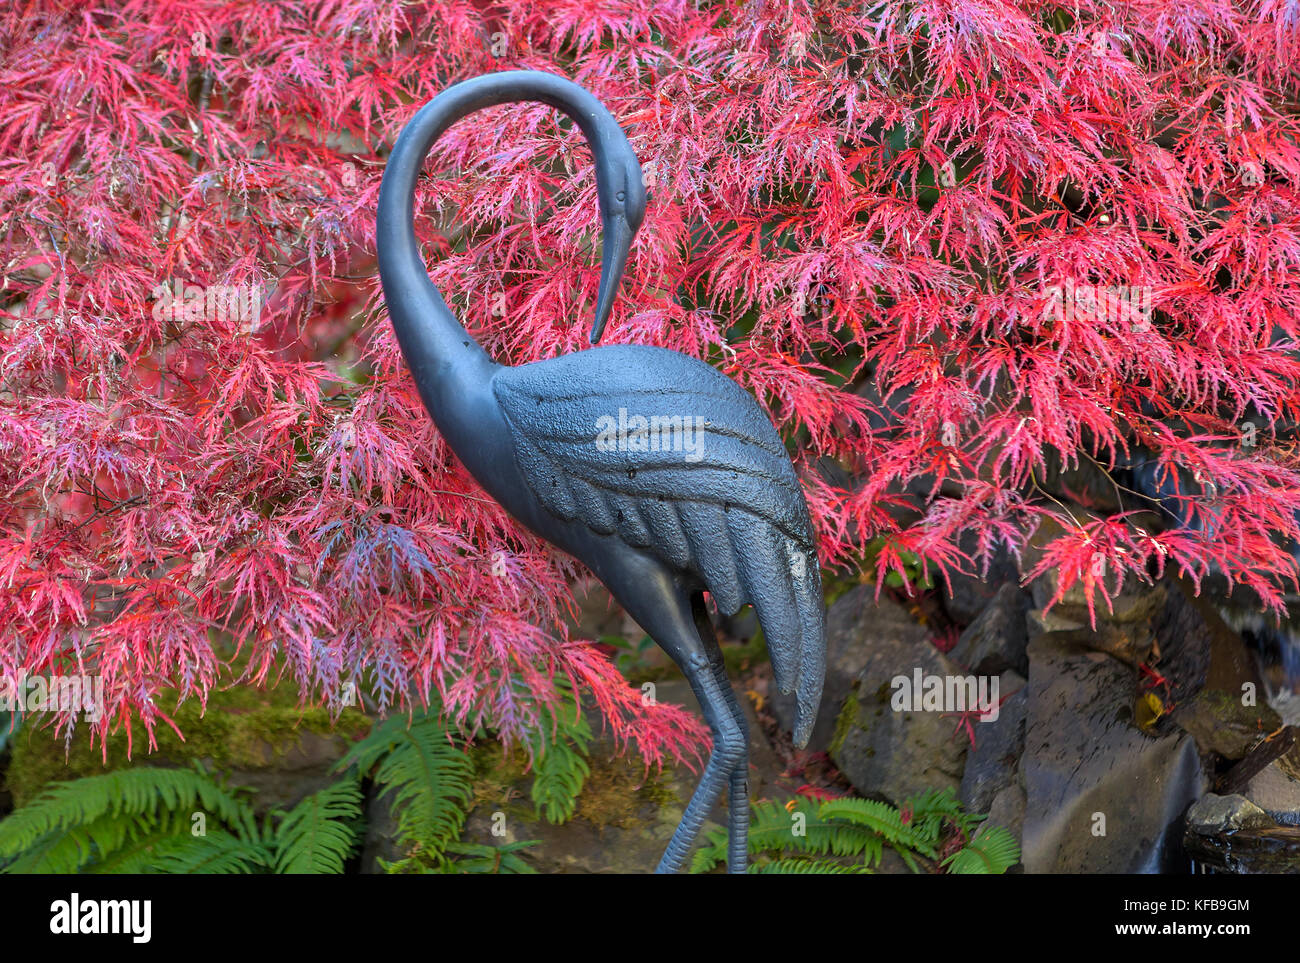 Bronze crane statue against red laced leaf maple trees in home garden backyard in fall season color Stock Photo